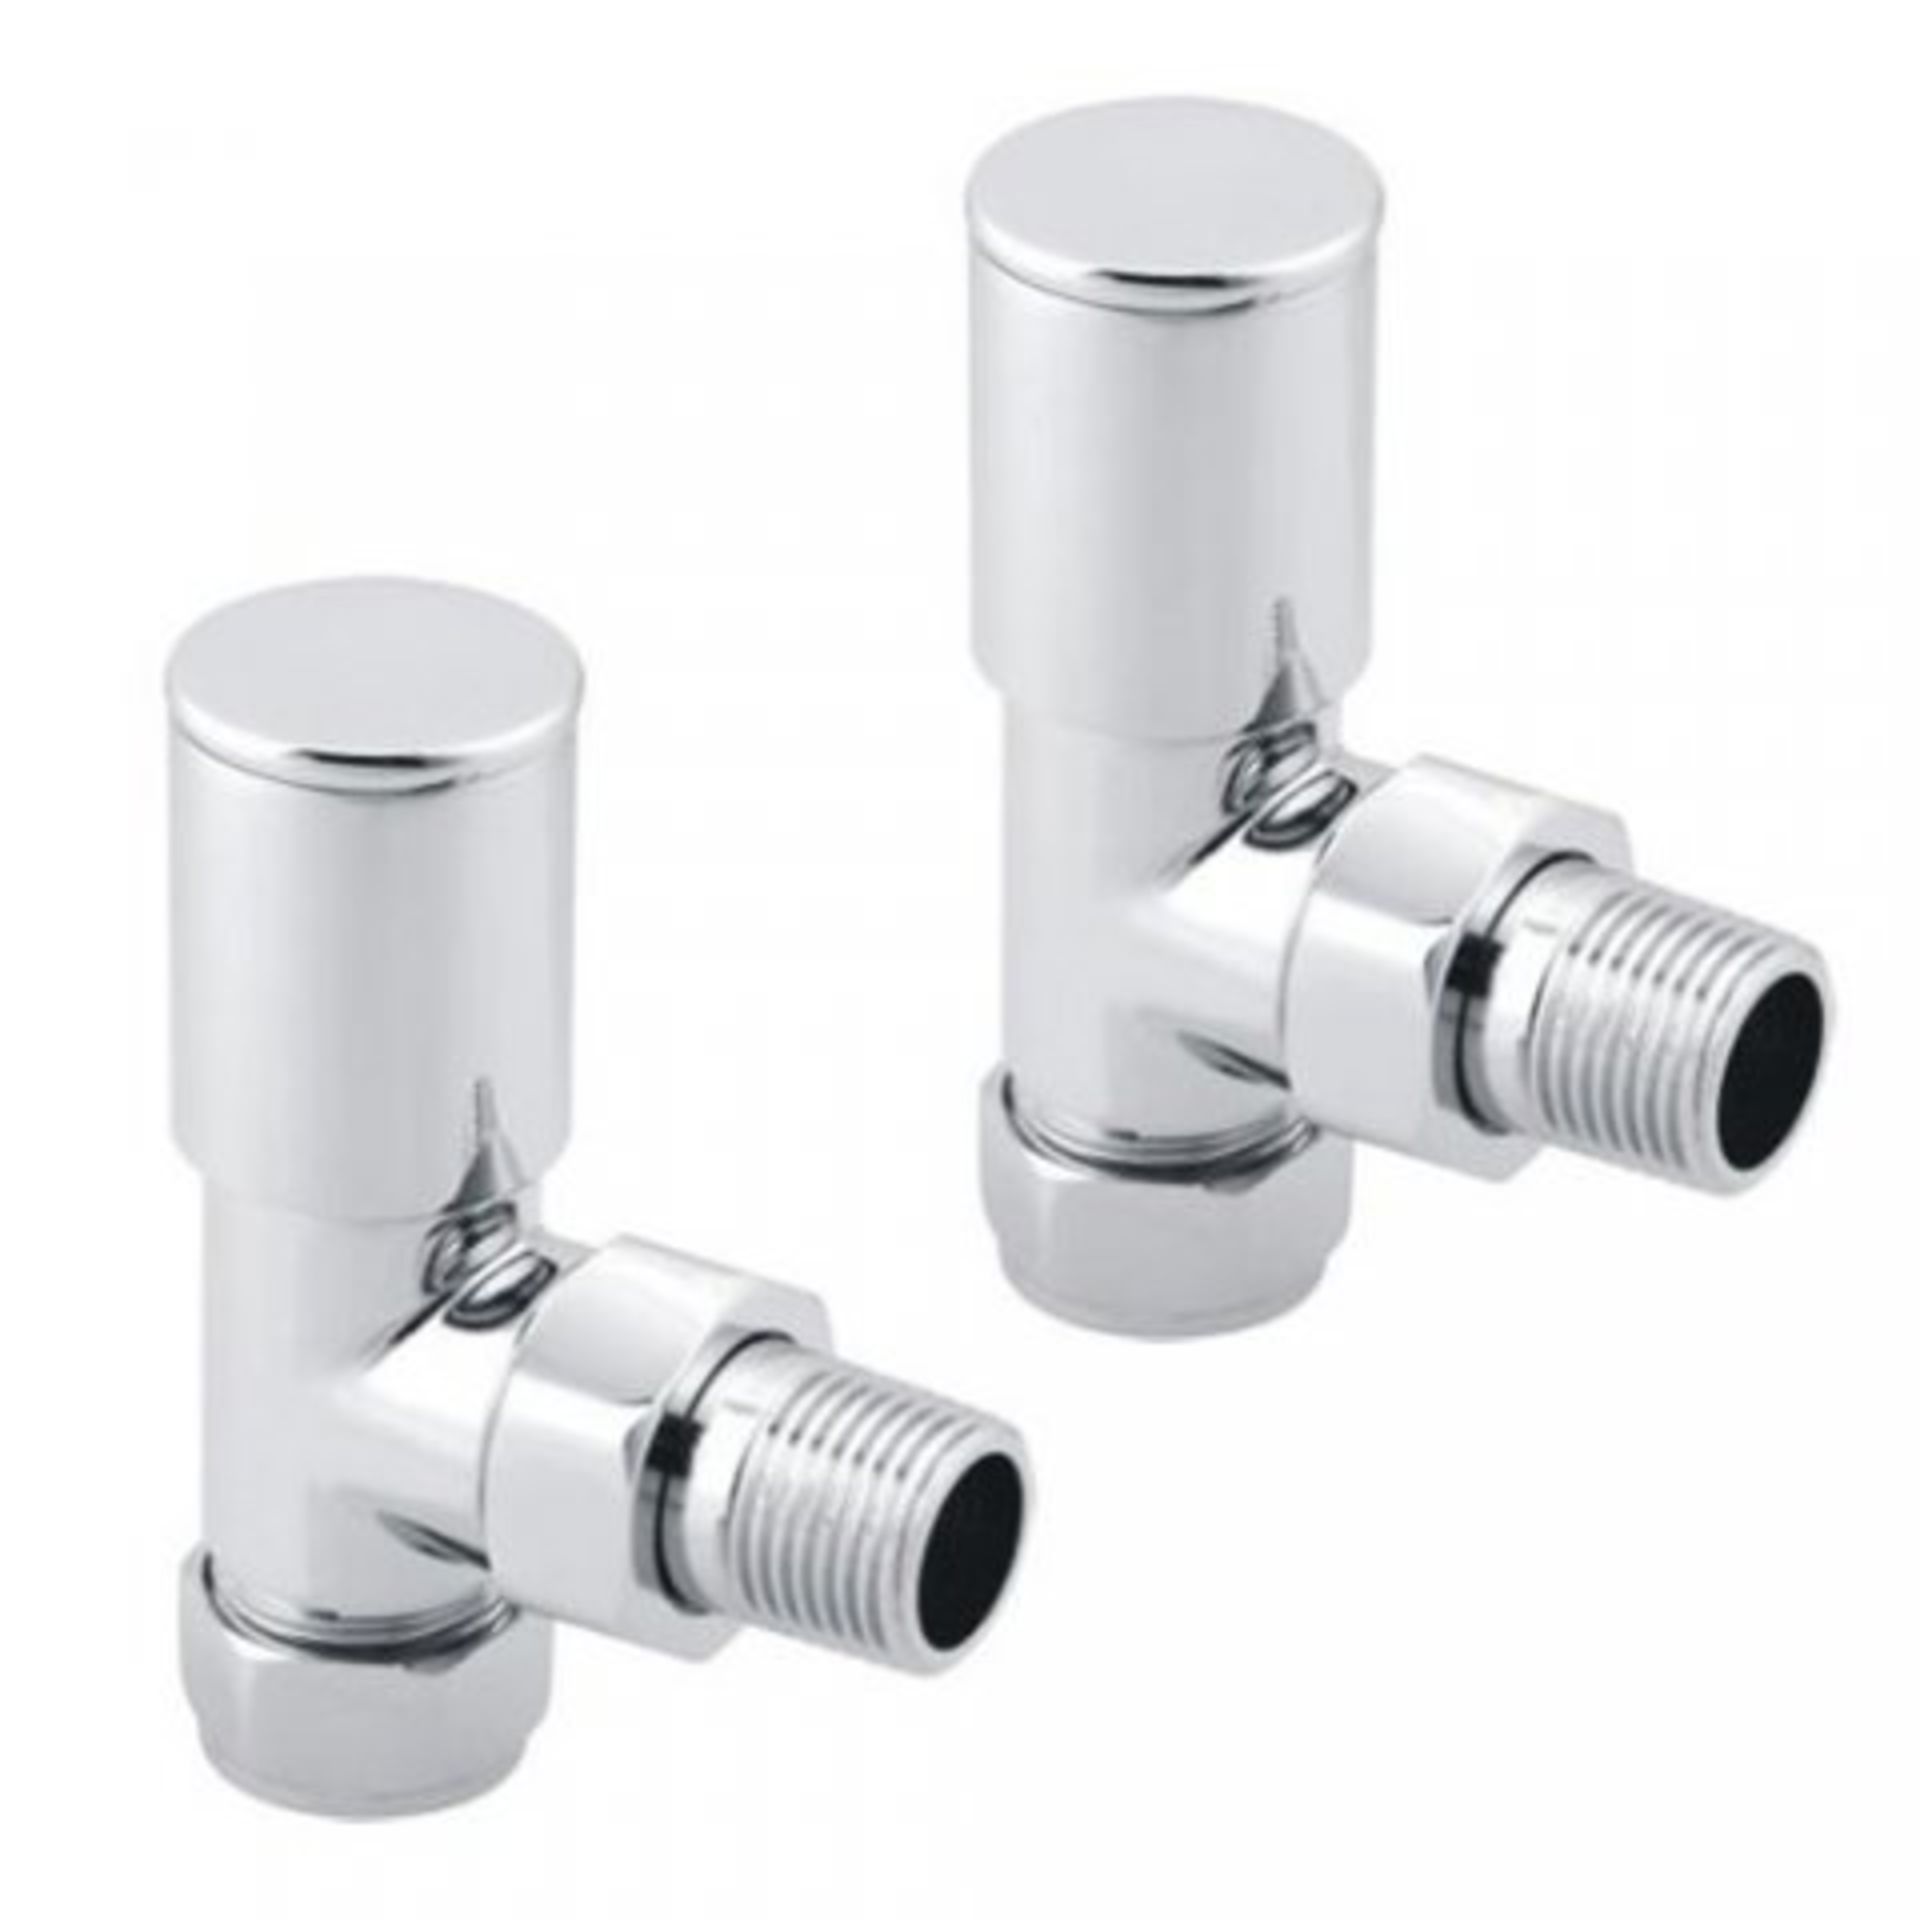 (M98) 15mm Standard Connection Angled Radiator Valves - Heavy Duty Polished Chrome Plated Brass Made - Image 2 of 2